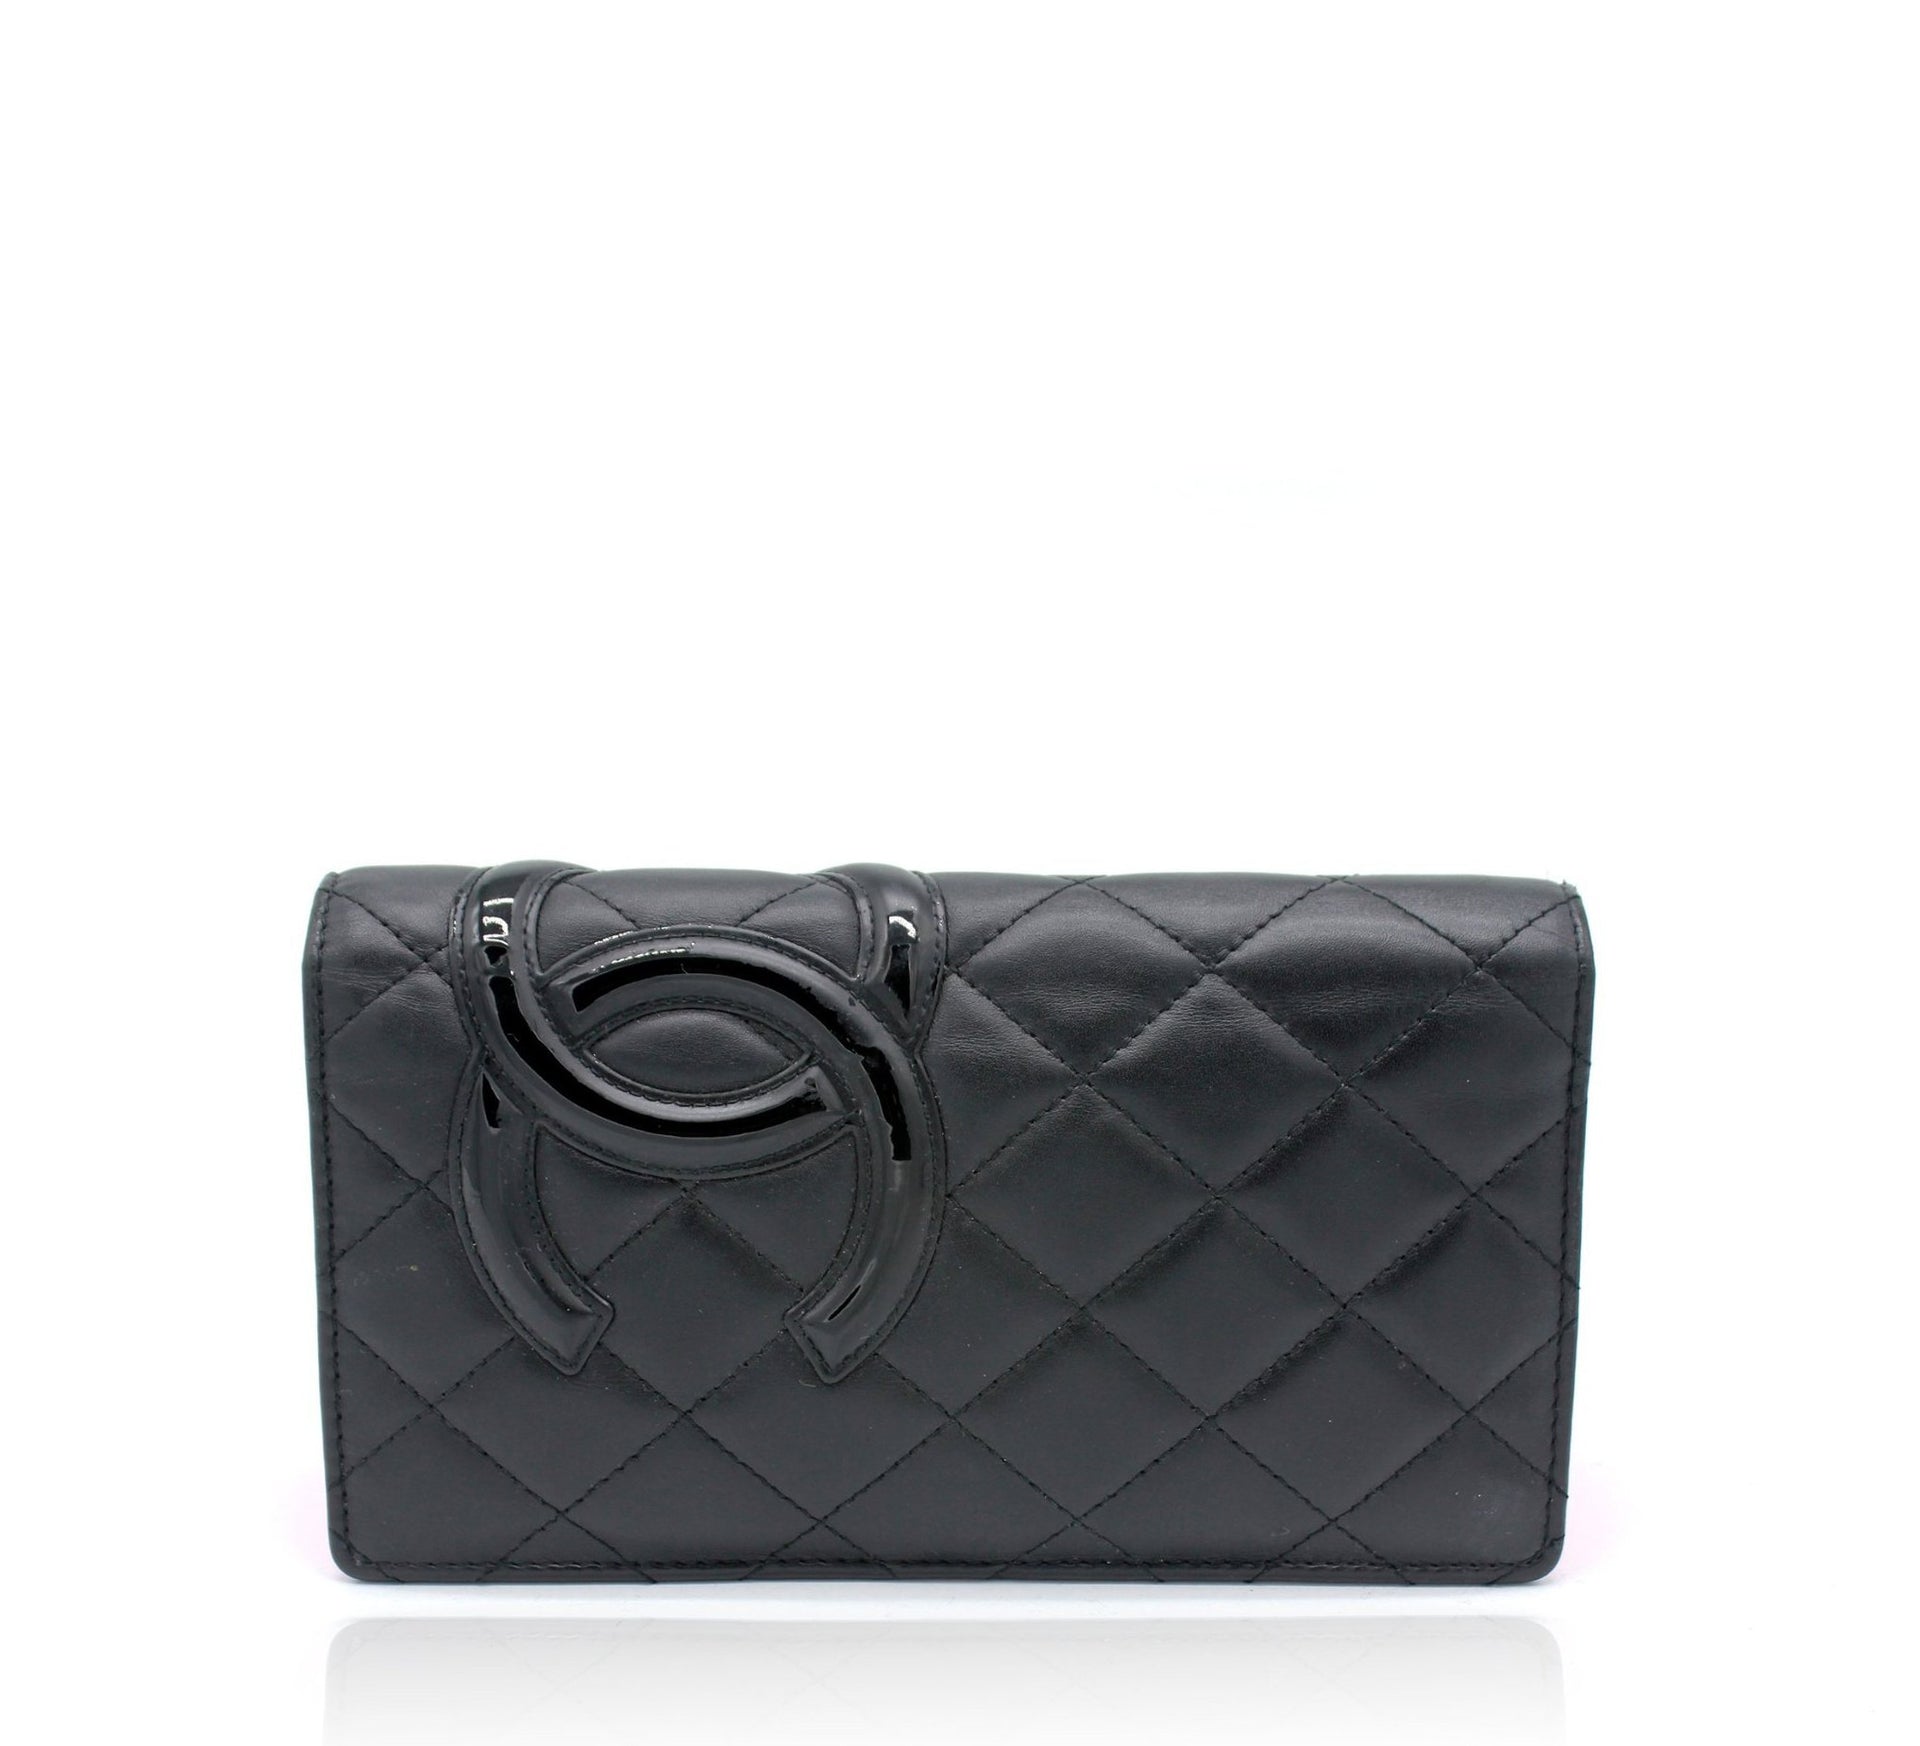 Chanel Chanel Cambon Neon Pink & Black Quilted Calfskin Leather